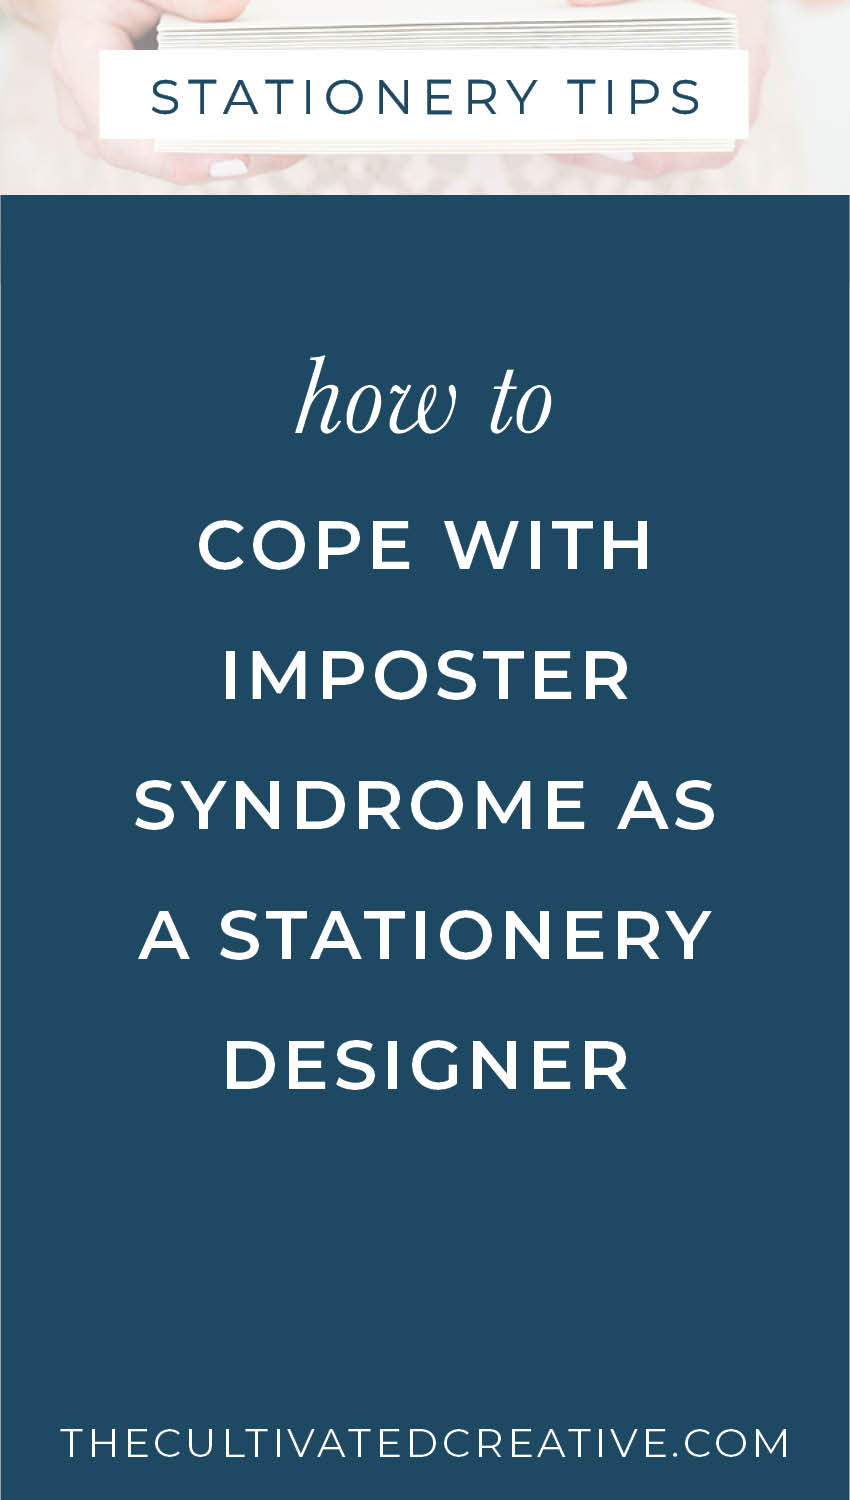 Coping with imposter syndrome as a stationer. How to identify it and be ok with it